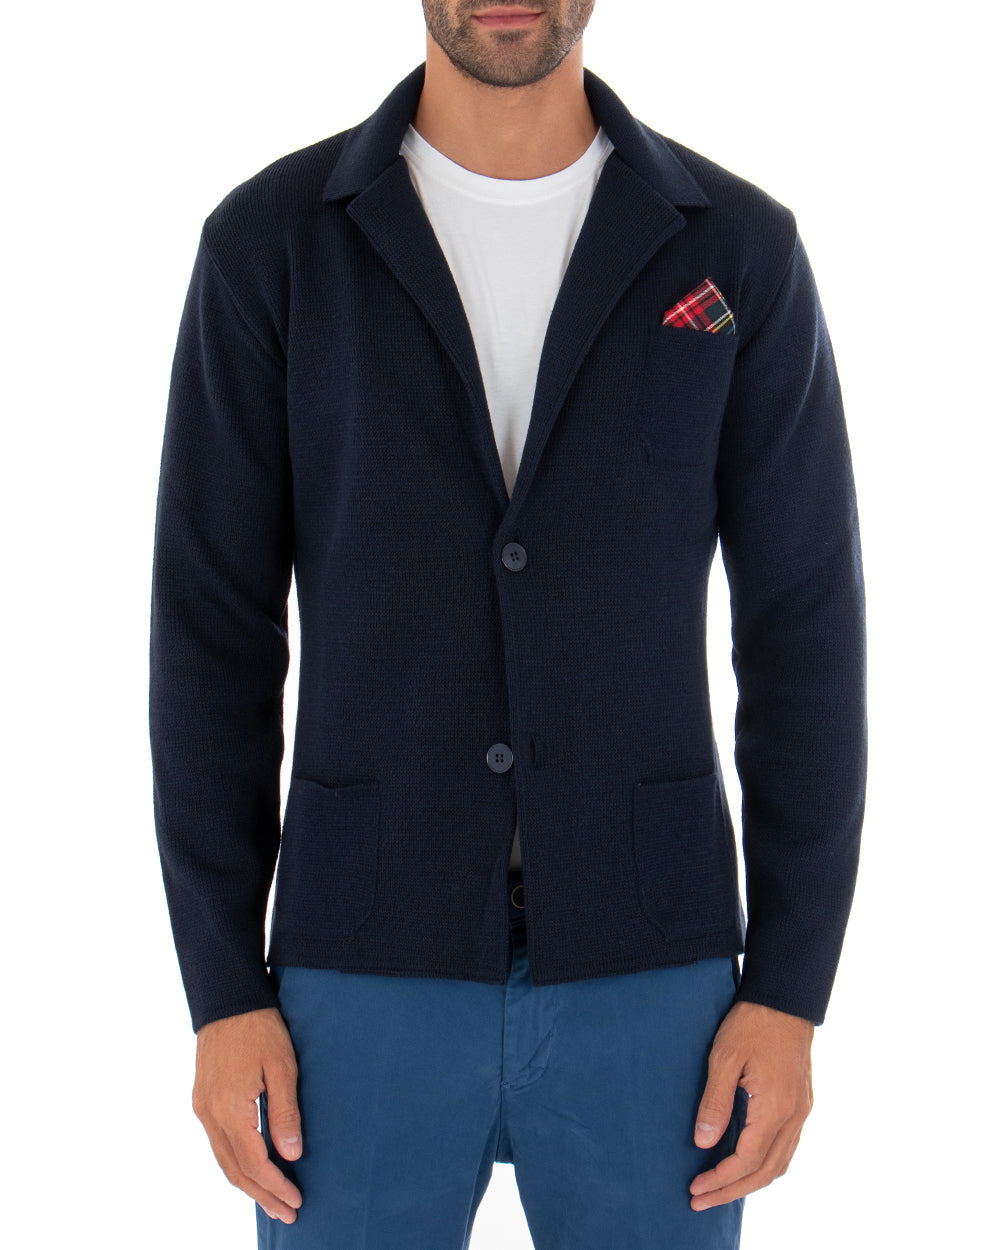 Men's Cardigan Jacket With Buttons Knit Sweater Solid Color Casual Blue GIOSAL-M2664A